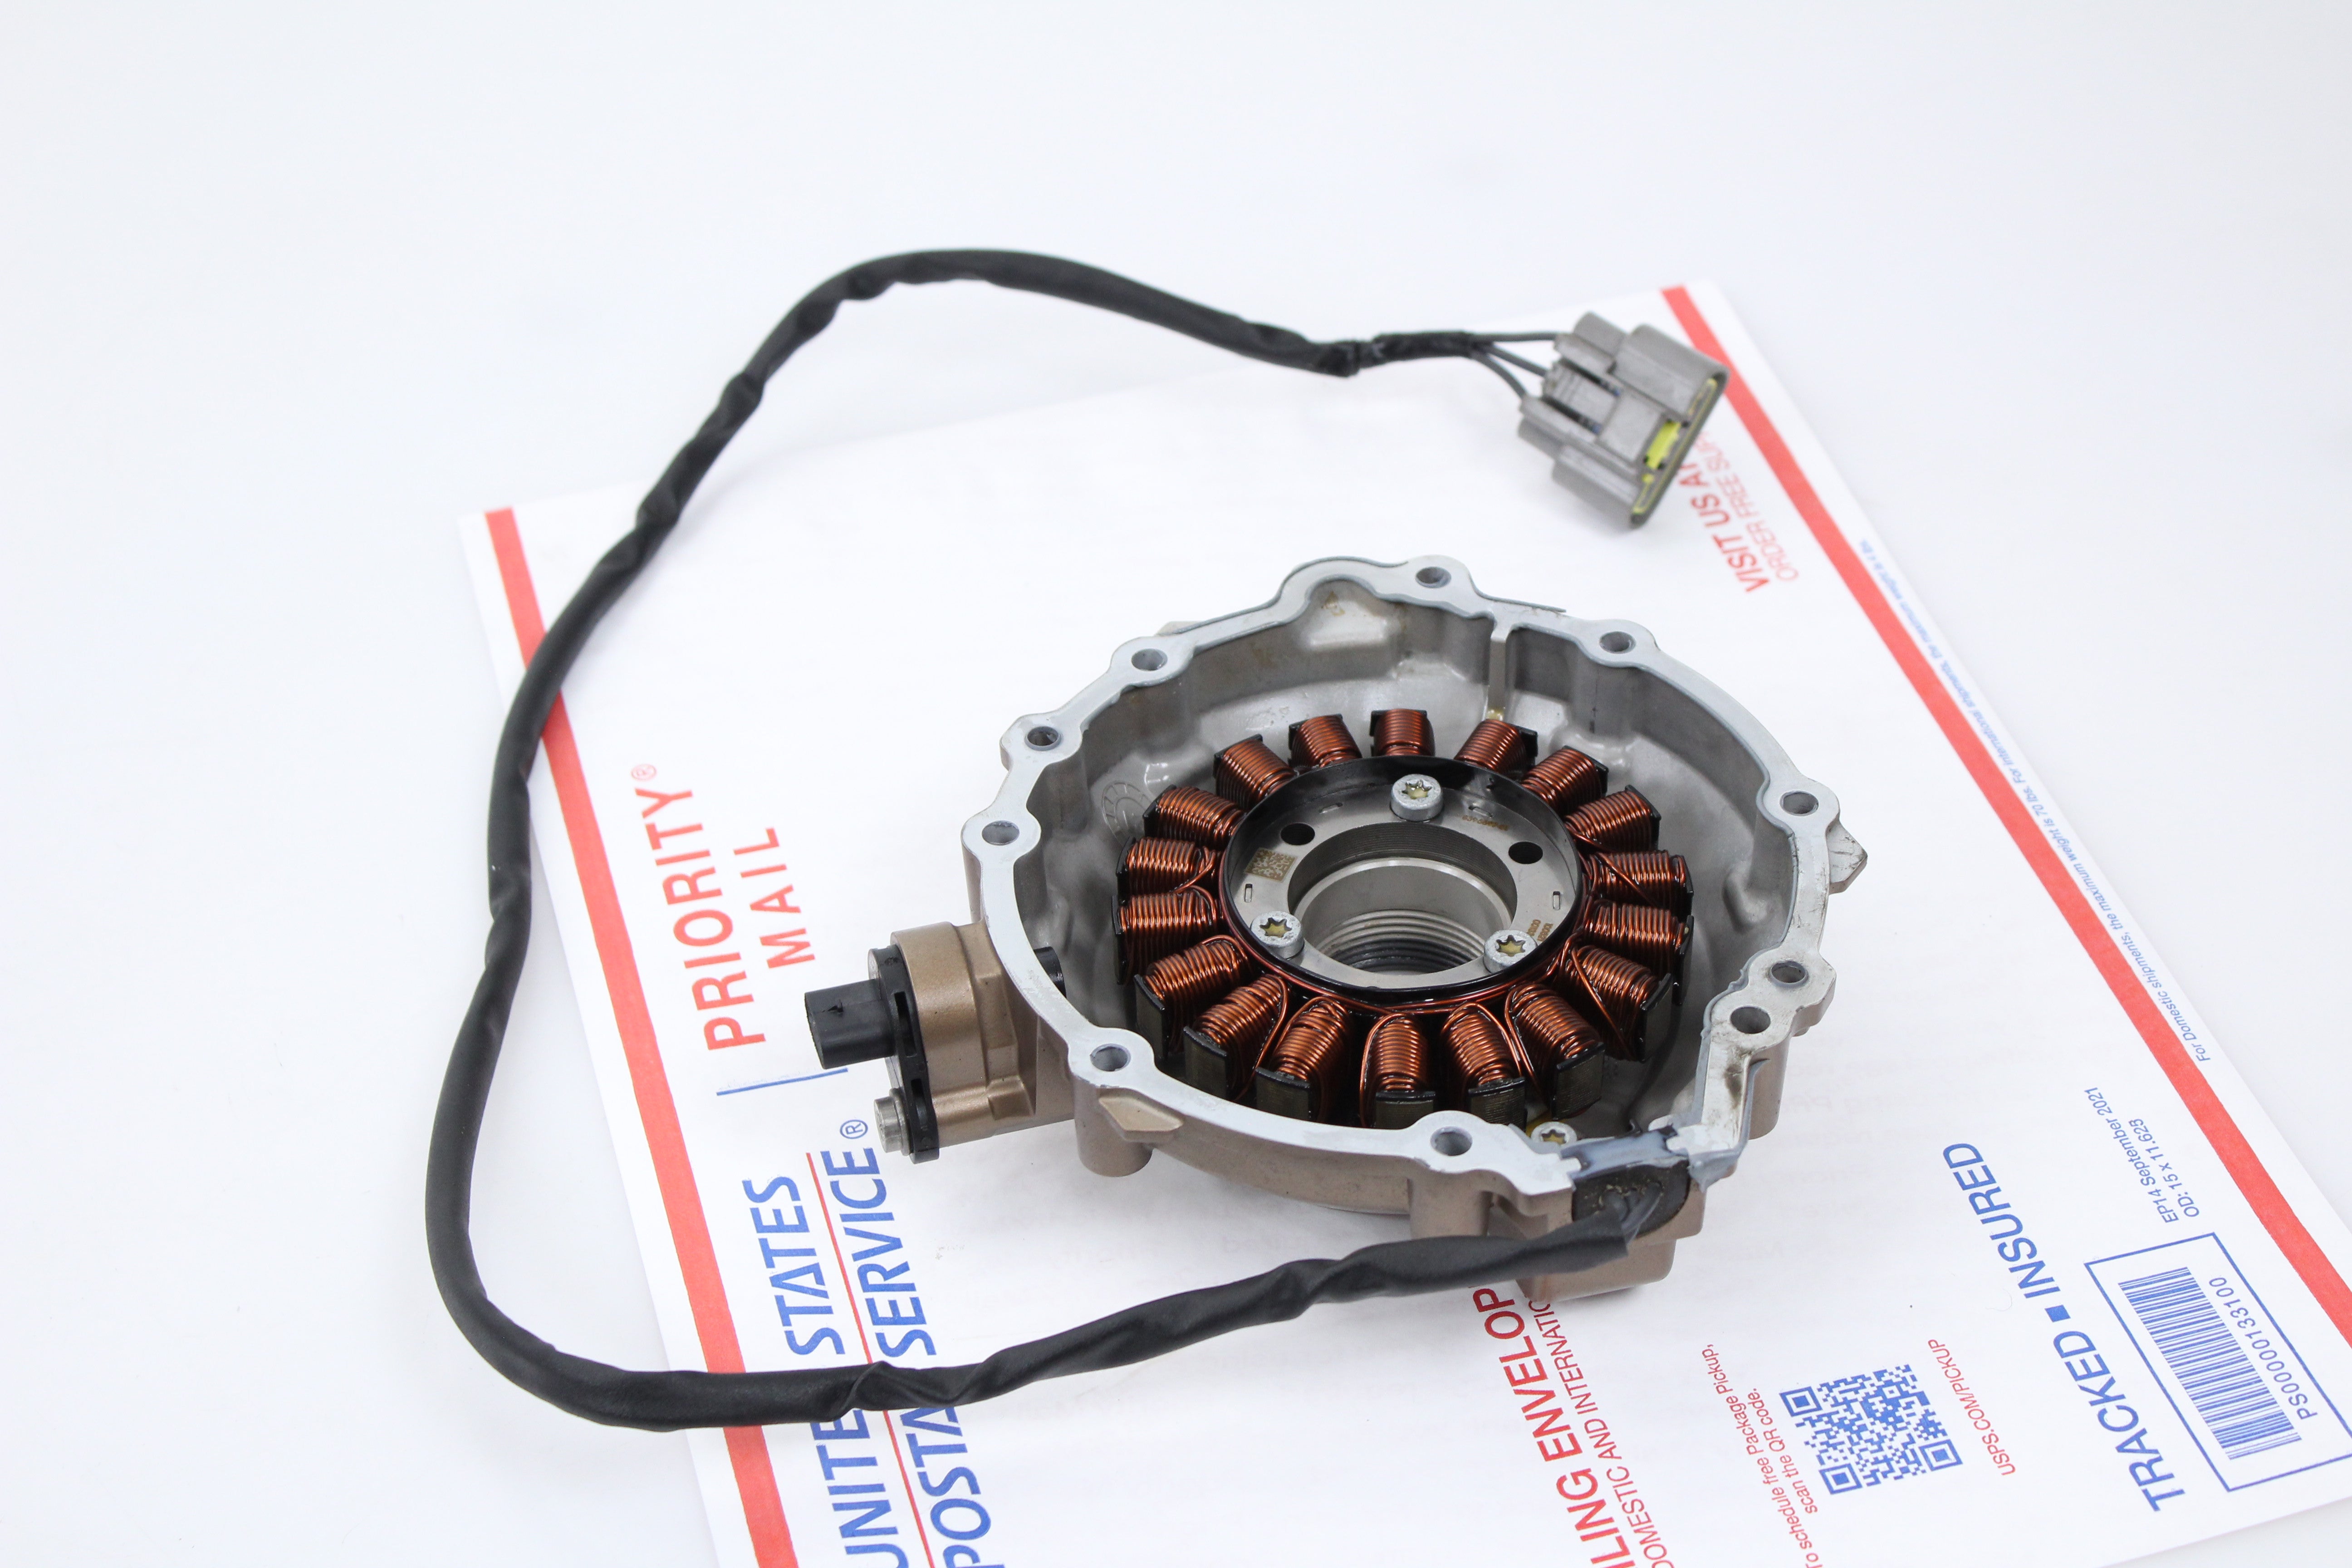 USED Stator Generator BMW 20-22 S1000R M1000RR OEM Used part. Engine was working before removed. Comes as pictured | Cheap Thrills Motorsports